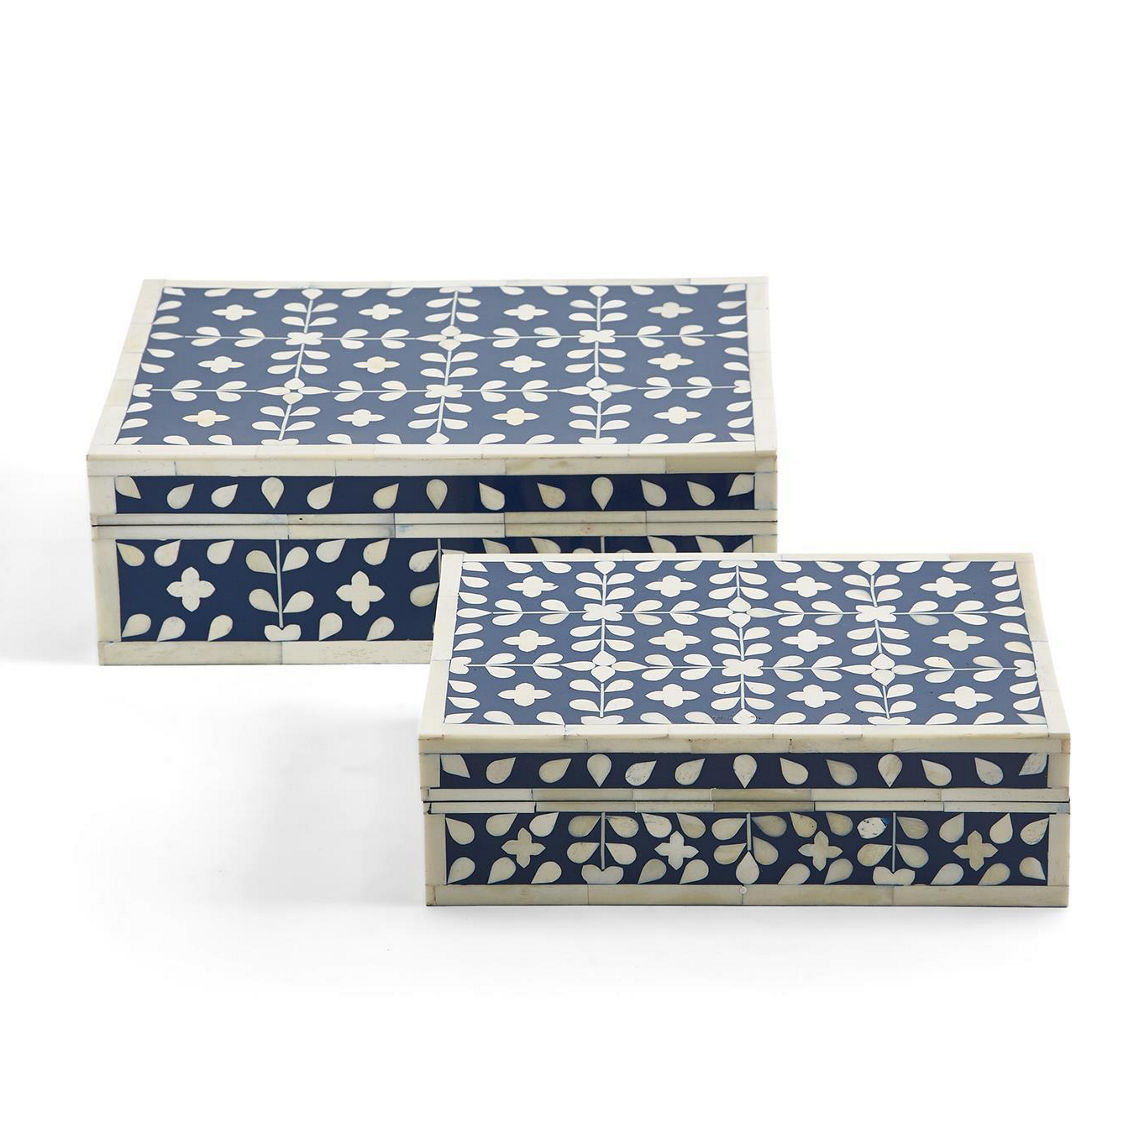 Tozai S/2 Flower and Petals Blue/White Tear Cover Box - Image 2 of 4